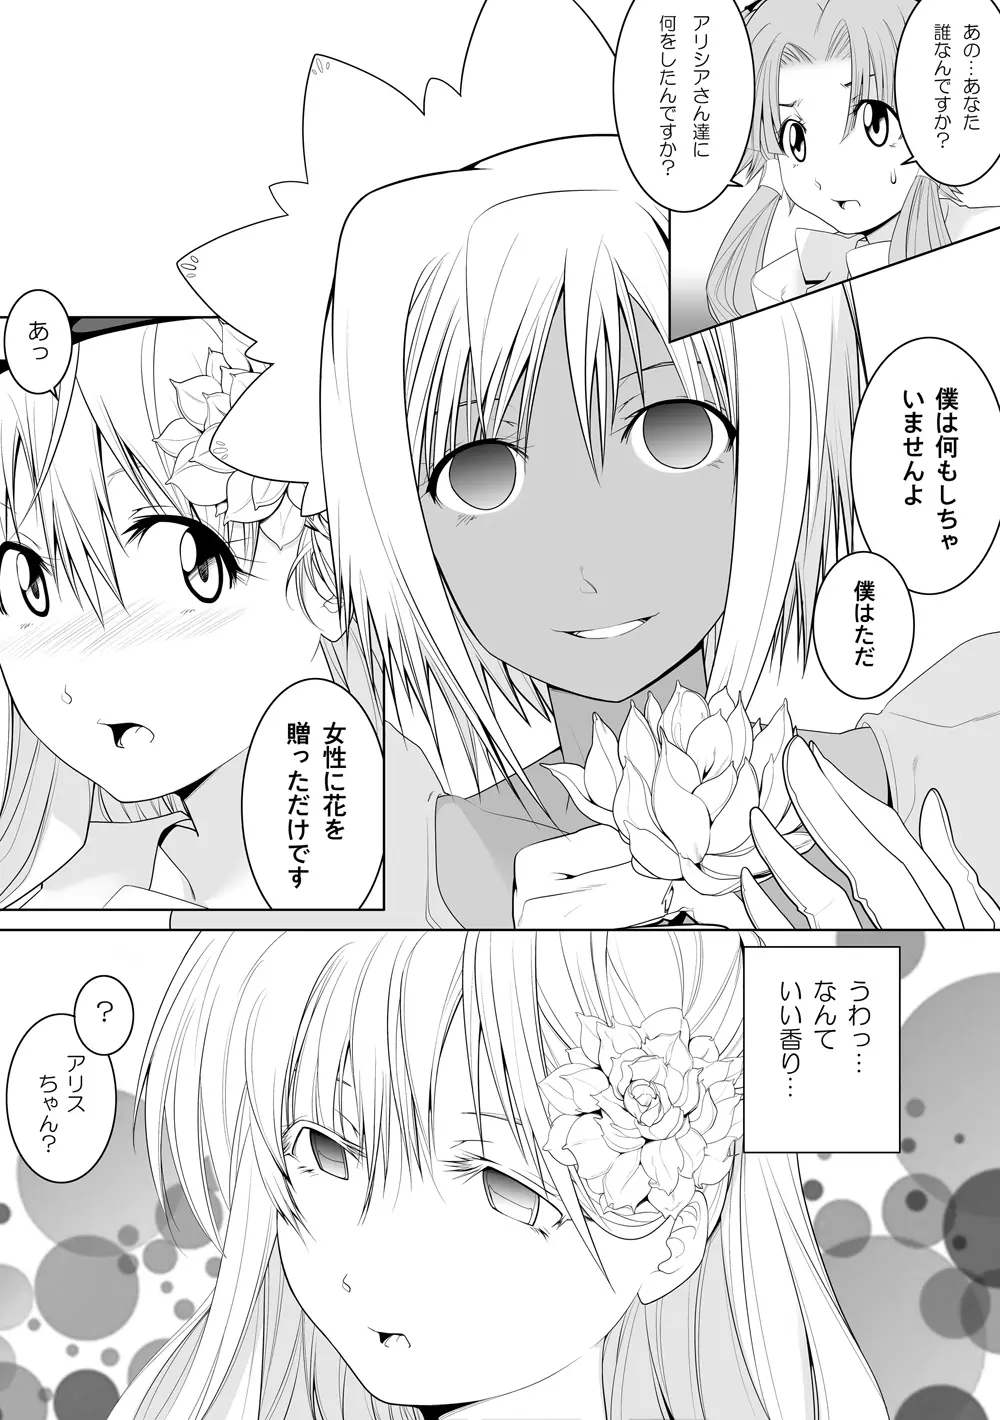 AR〇A 洗脳漫画 15ページ